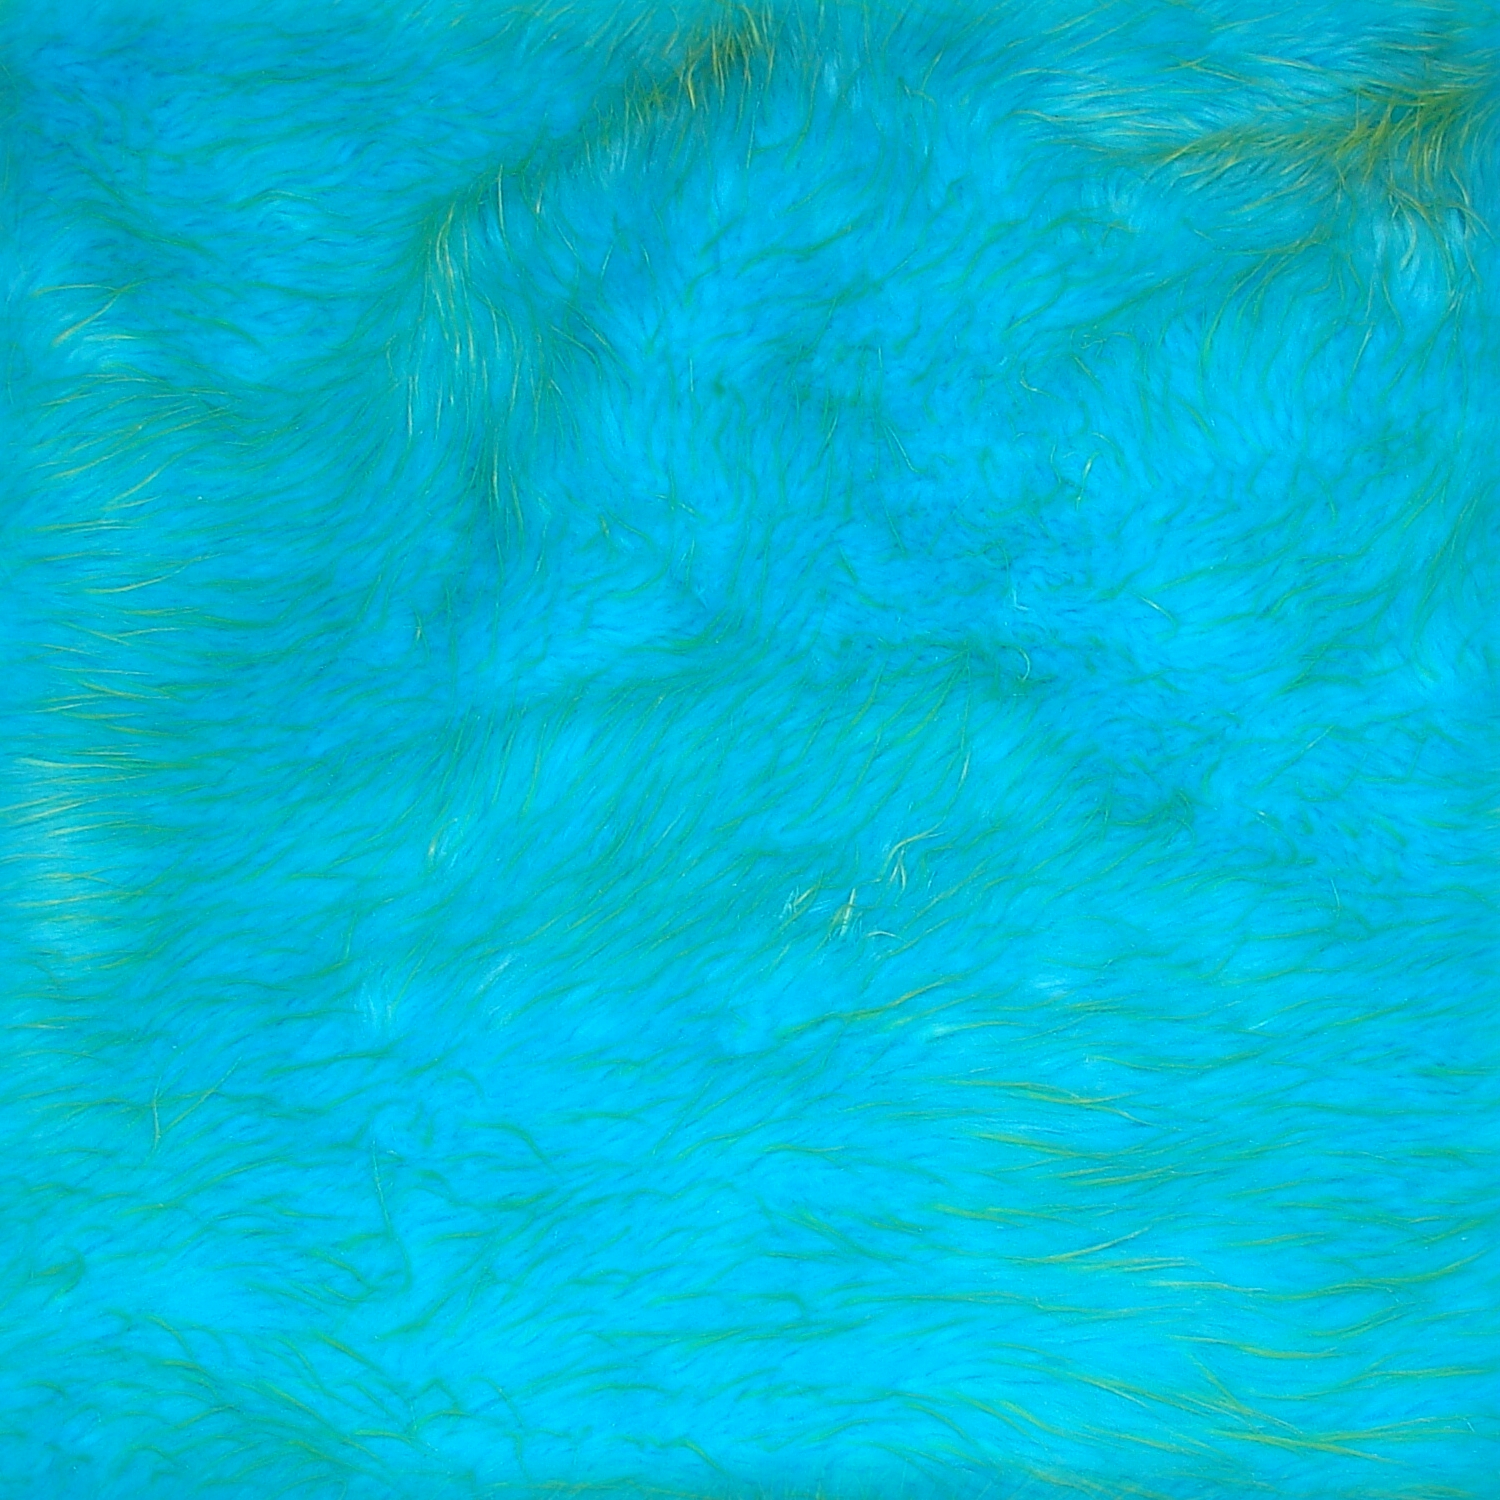 Blue and Green Fur Texture 2 by FantasyStock on DeviantArt